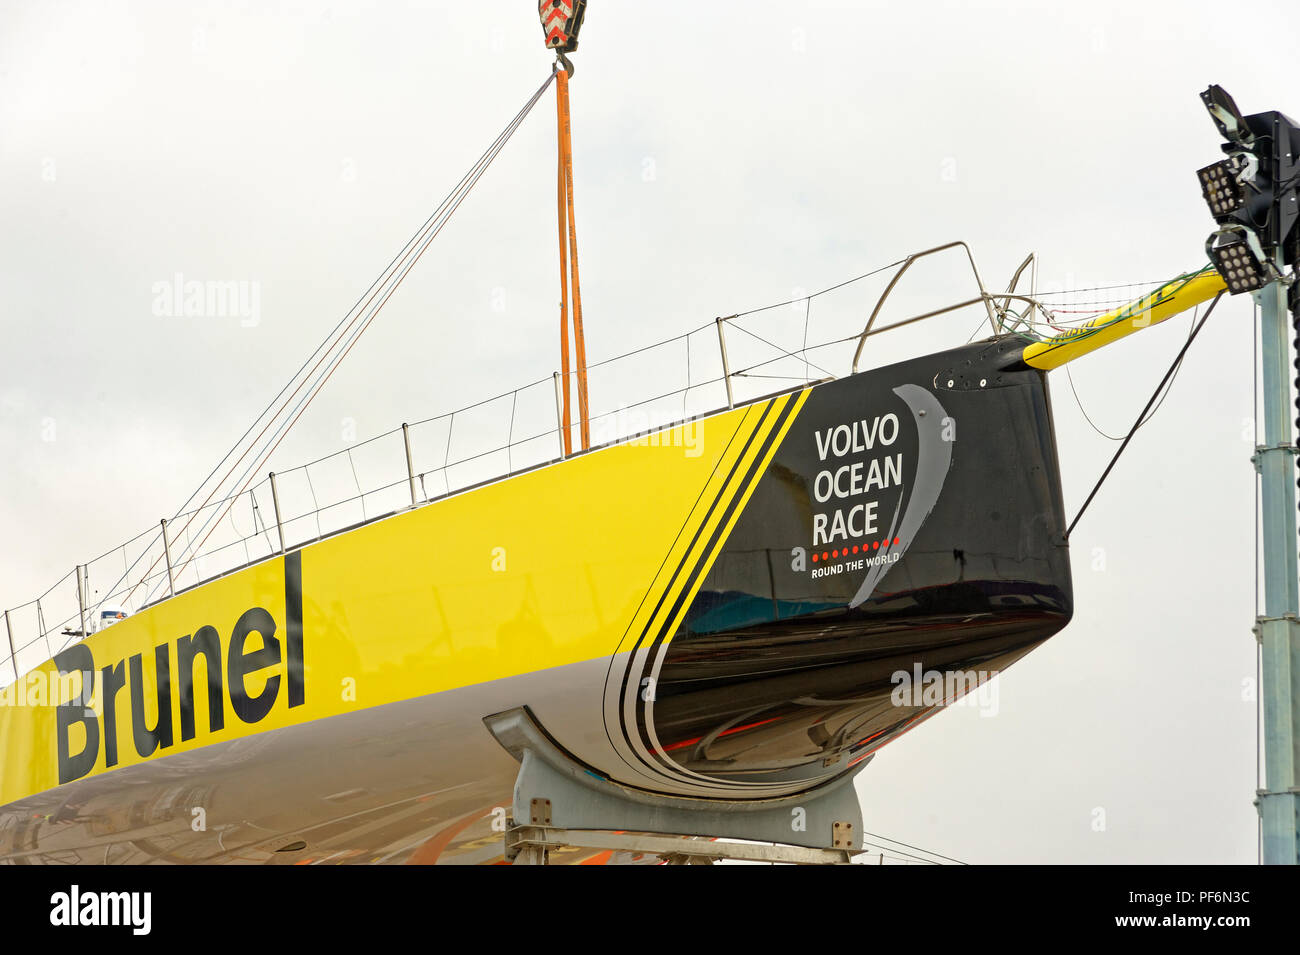 Brunel racing yacht from the Volvo Ocean Race 2018 Stock Photo